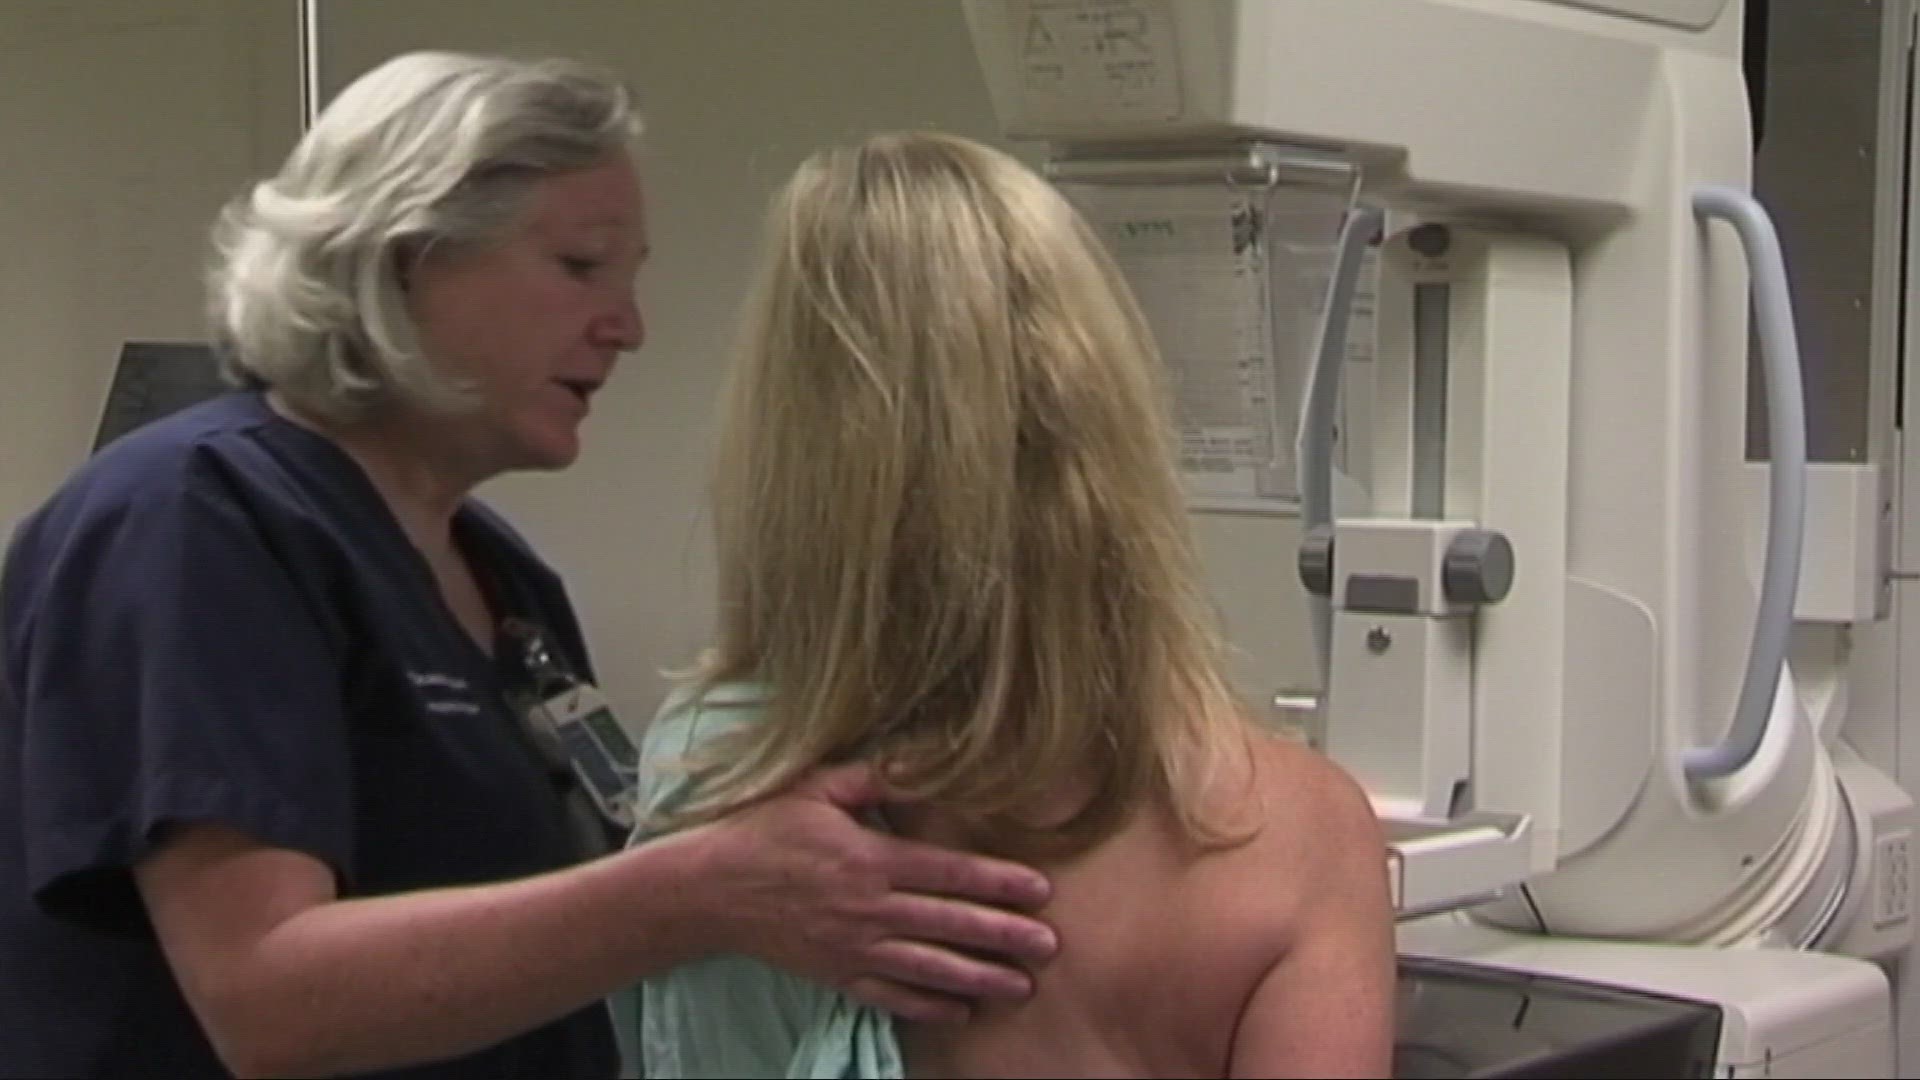 Mammogram providers will be required to tell women if they have dense breast tissue.